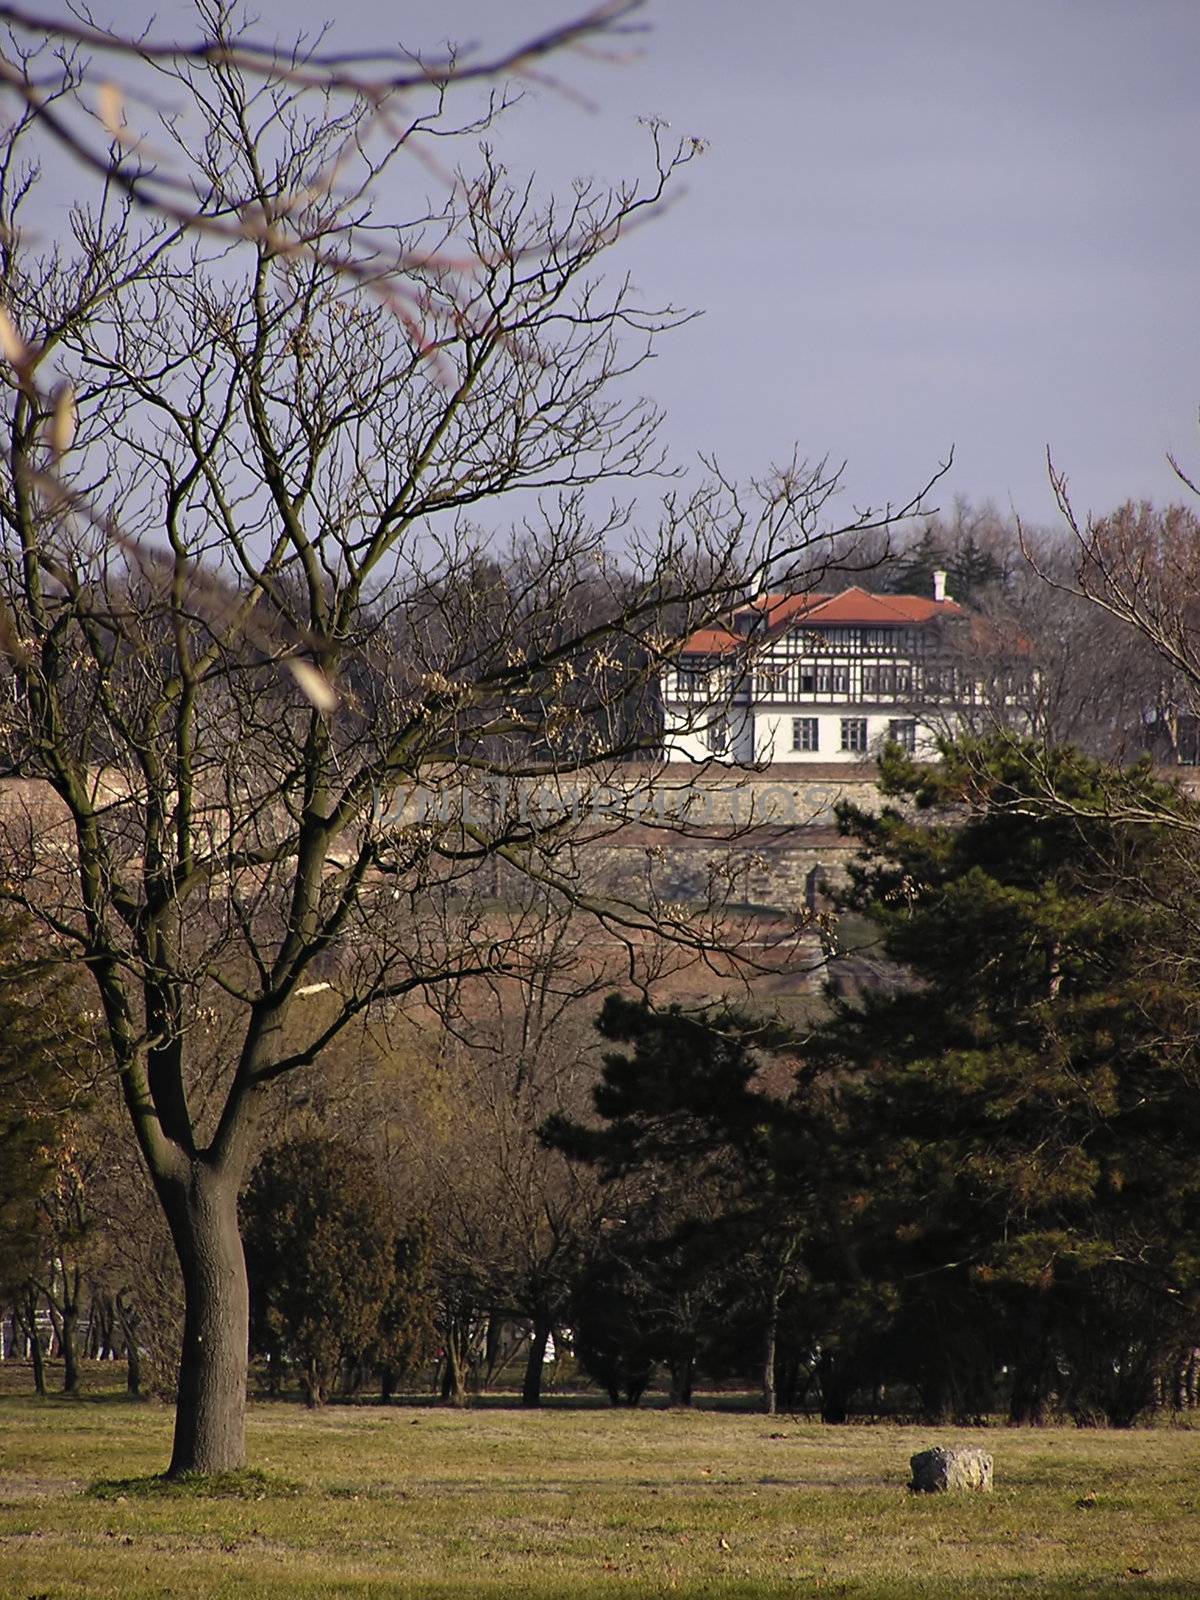 House at top of hill, leafless branches in front.